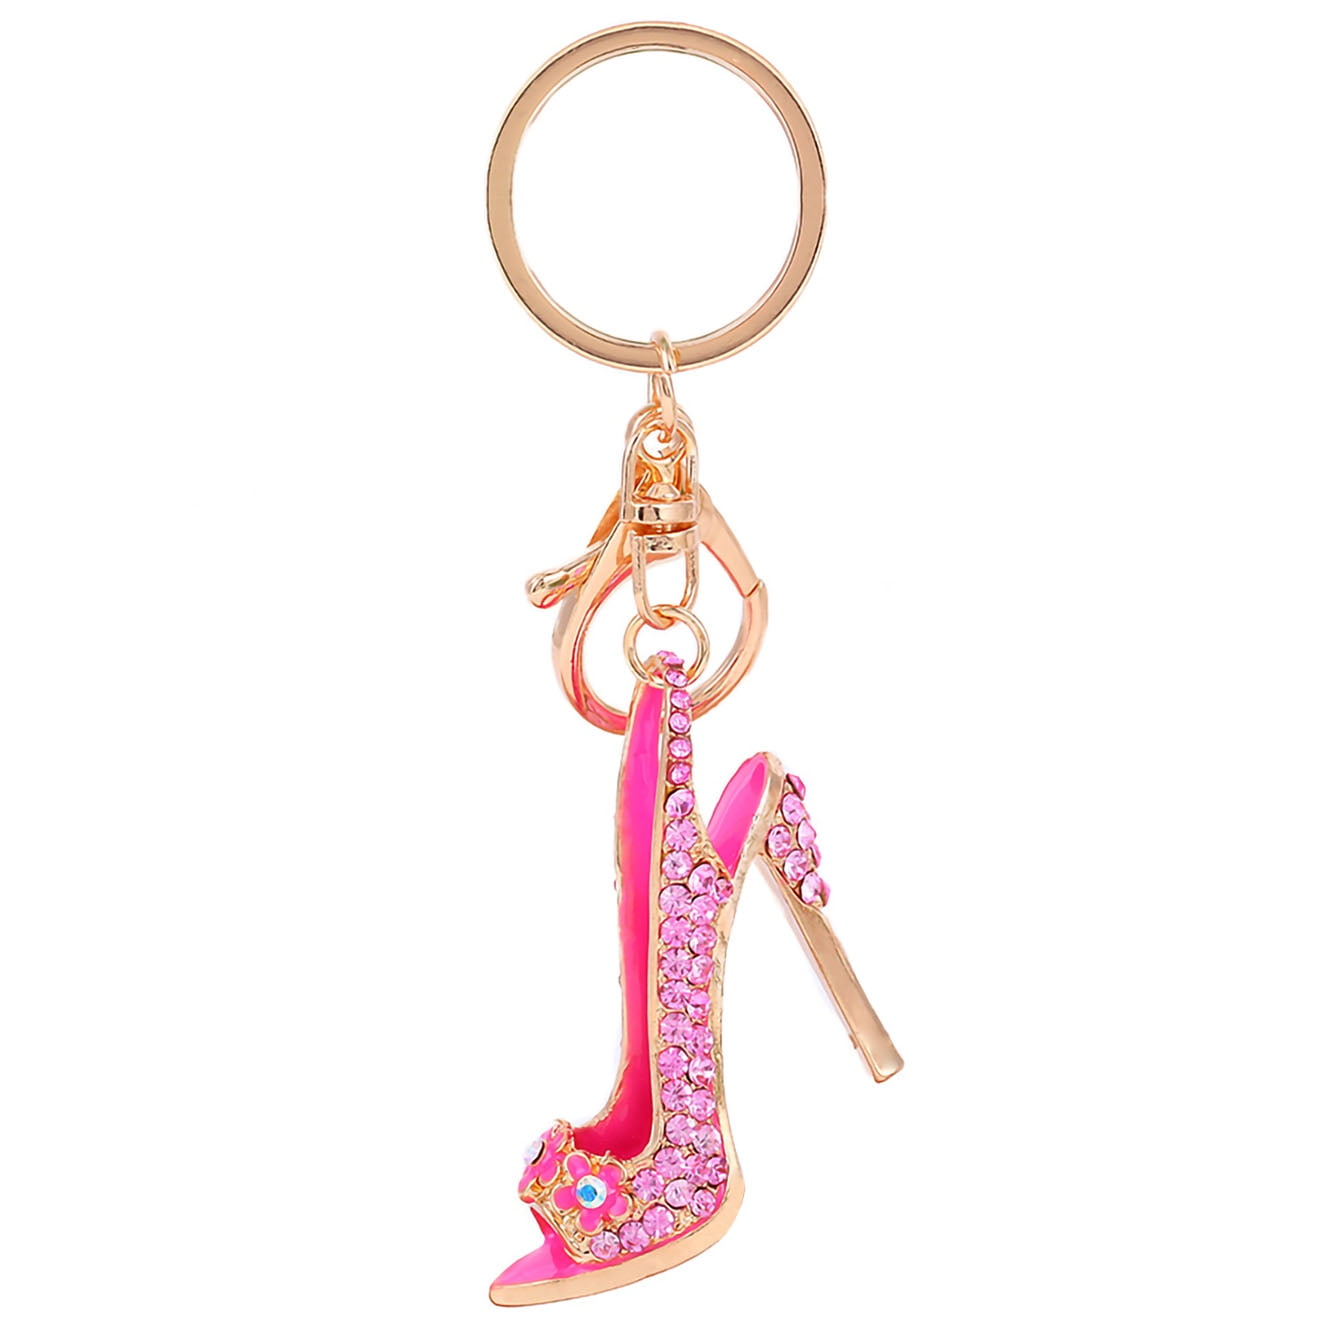 SOLID METAL 2 PIECE LADIES HIGH HEELED SHOES DIAMONTE 4COLOURS KEYRING GIFT IDEA 